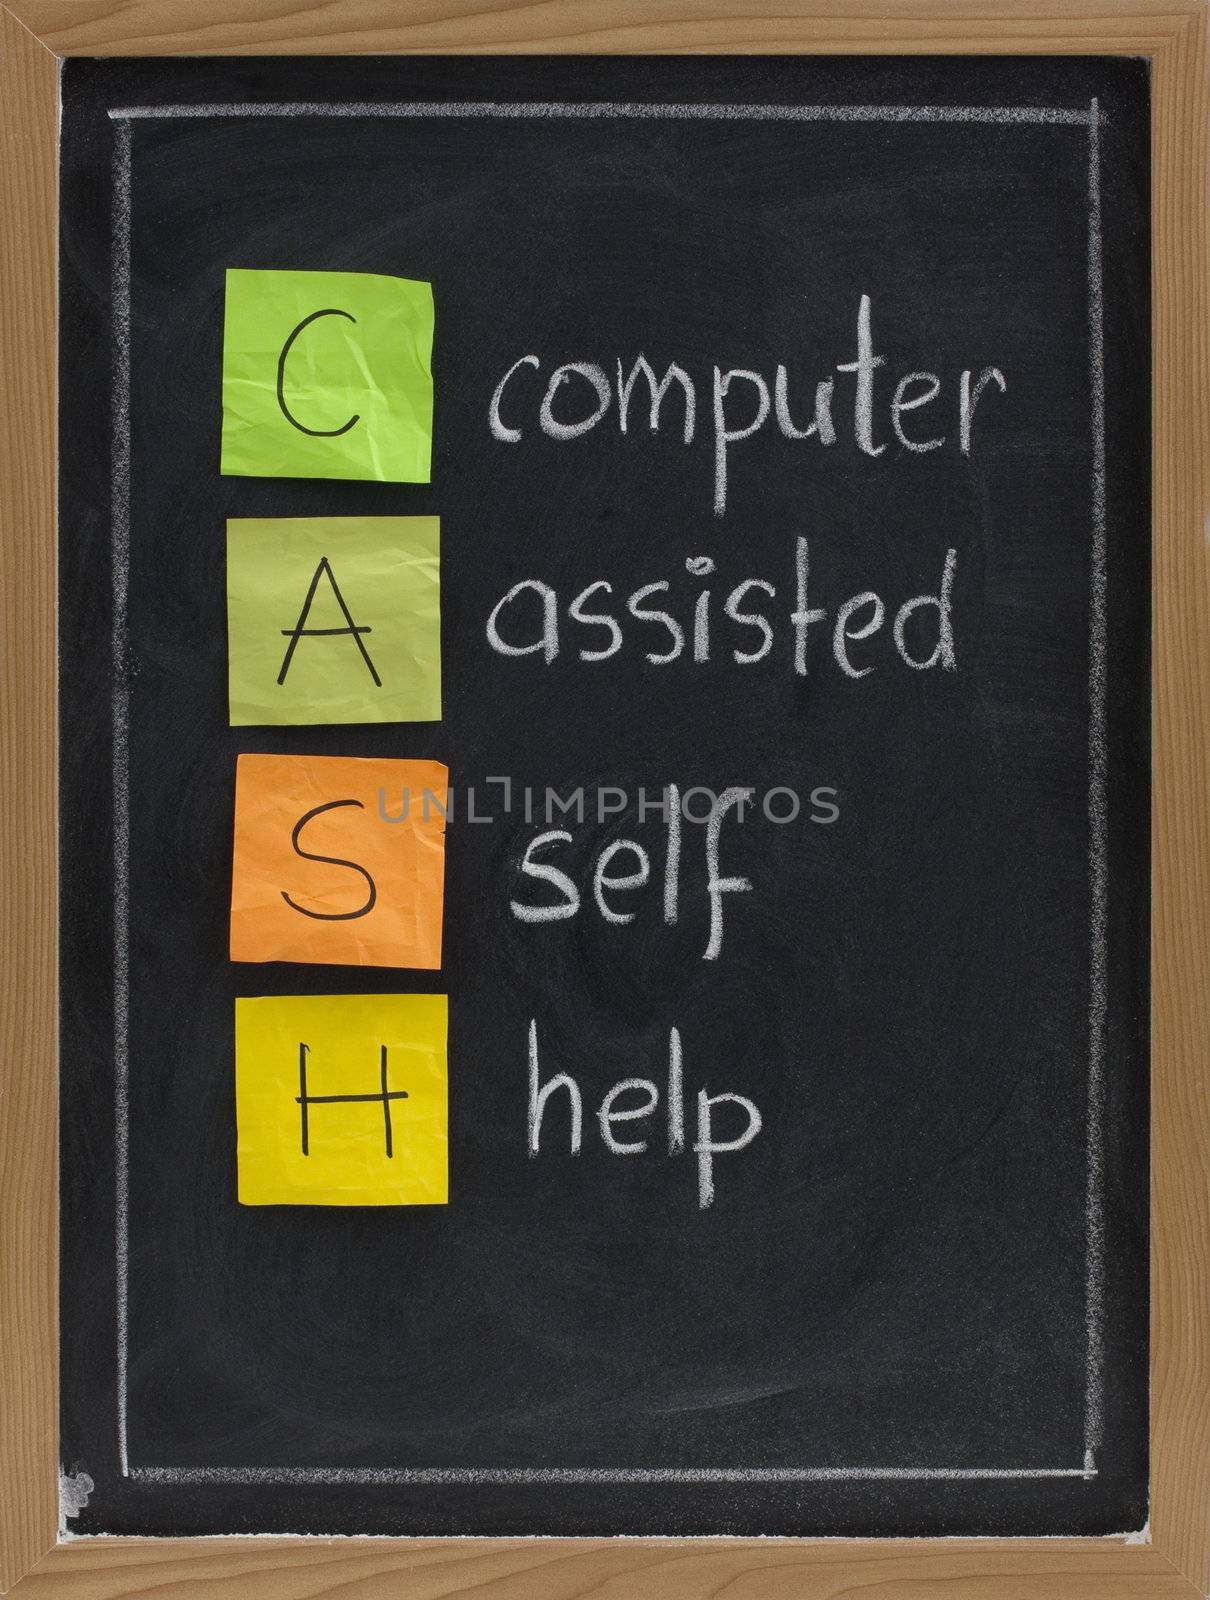 CASH - computer assisted self help - acronym for modern age, presented on blackboard with white chalk handwriting and color sticky notes